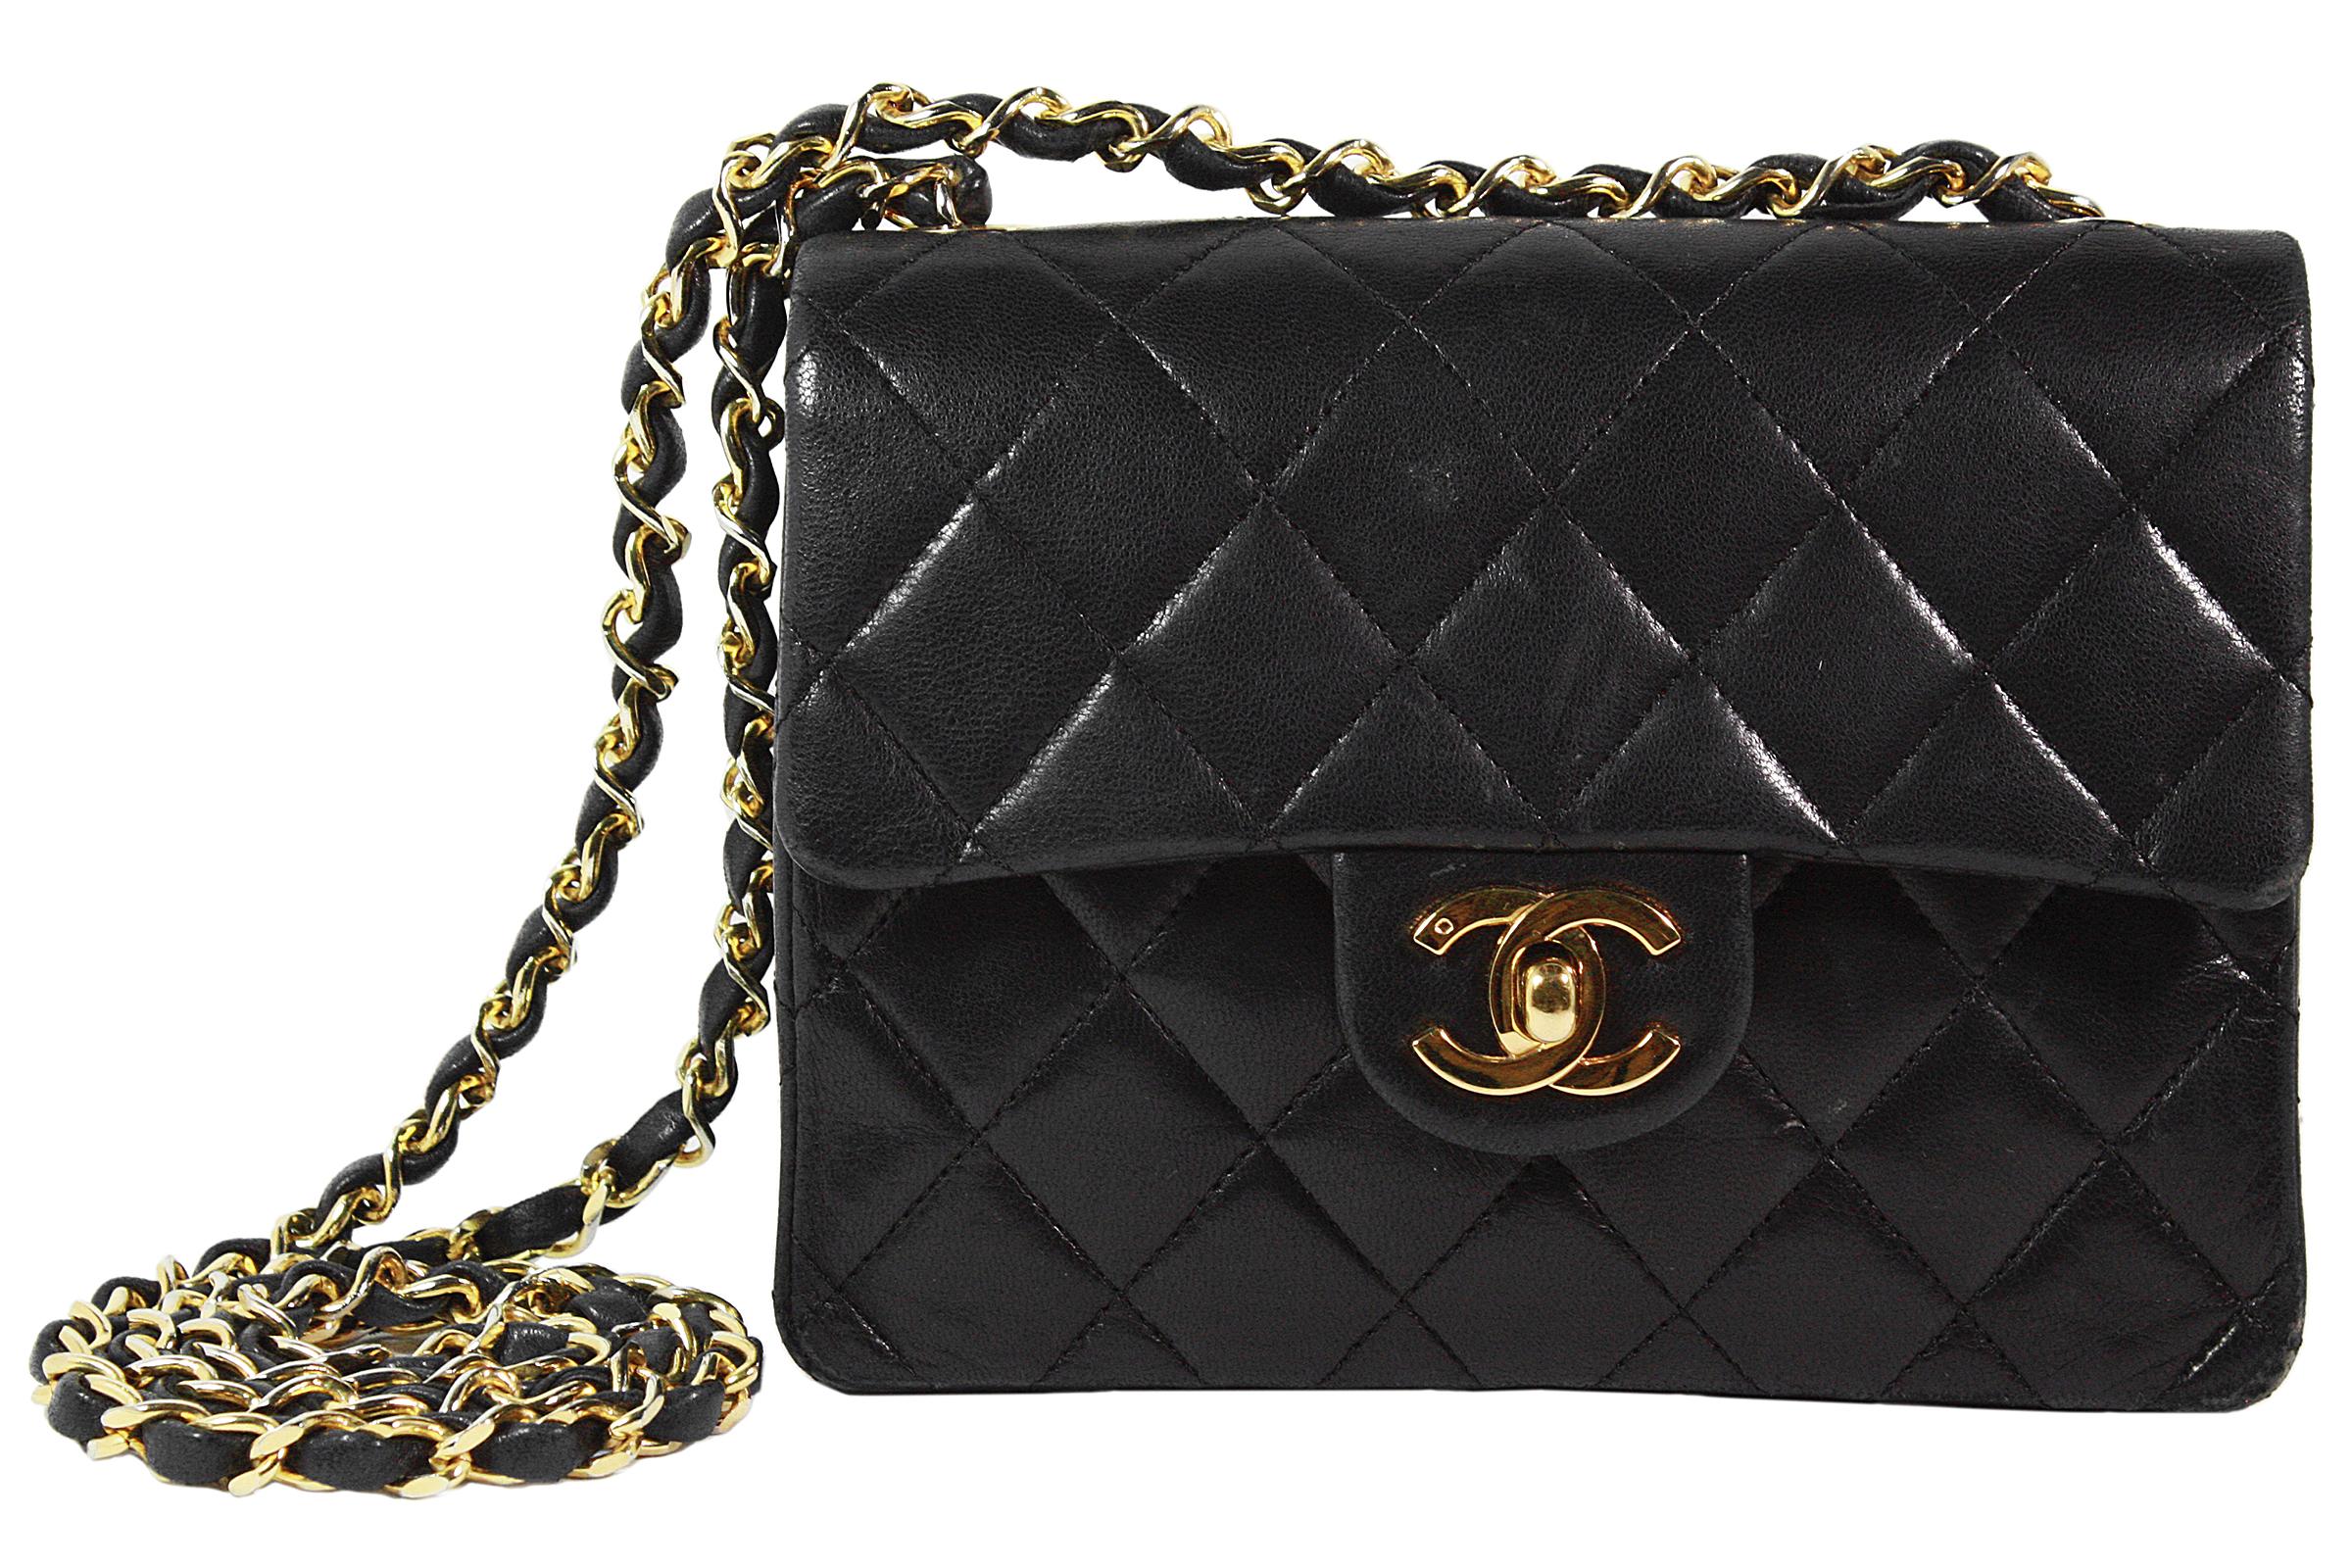 Chanel small crossbody bag
Soft black quilted leather  
Center gold classic CC logo 
Inside zipper pocket 
Gold and leather chain strap
Strap length: 44 inches 
Maroon leather lining 
Comes with dustbag
Serial number with authenticity card: 0616963